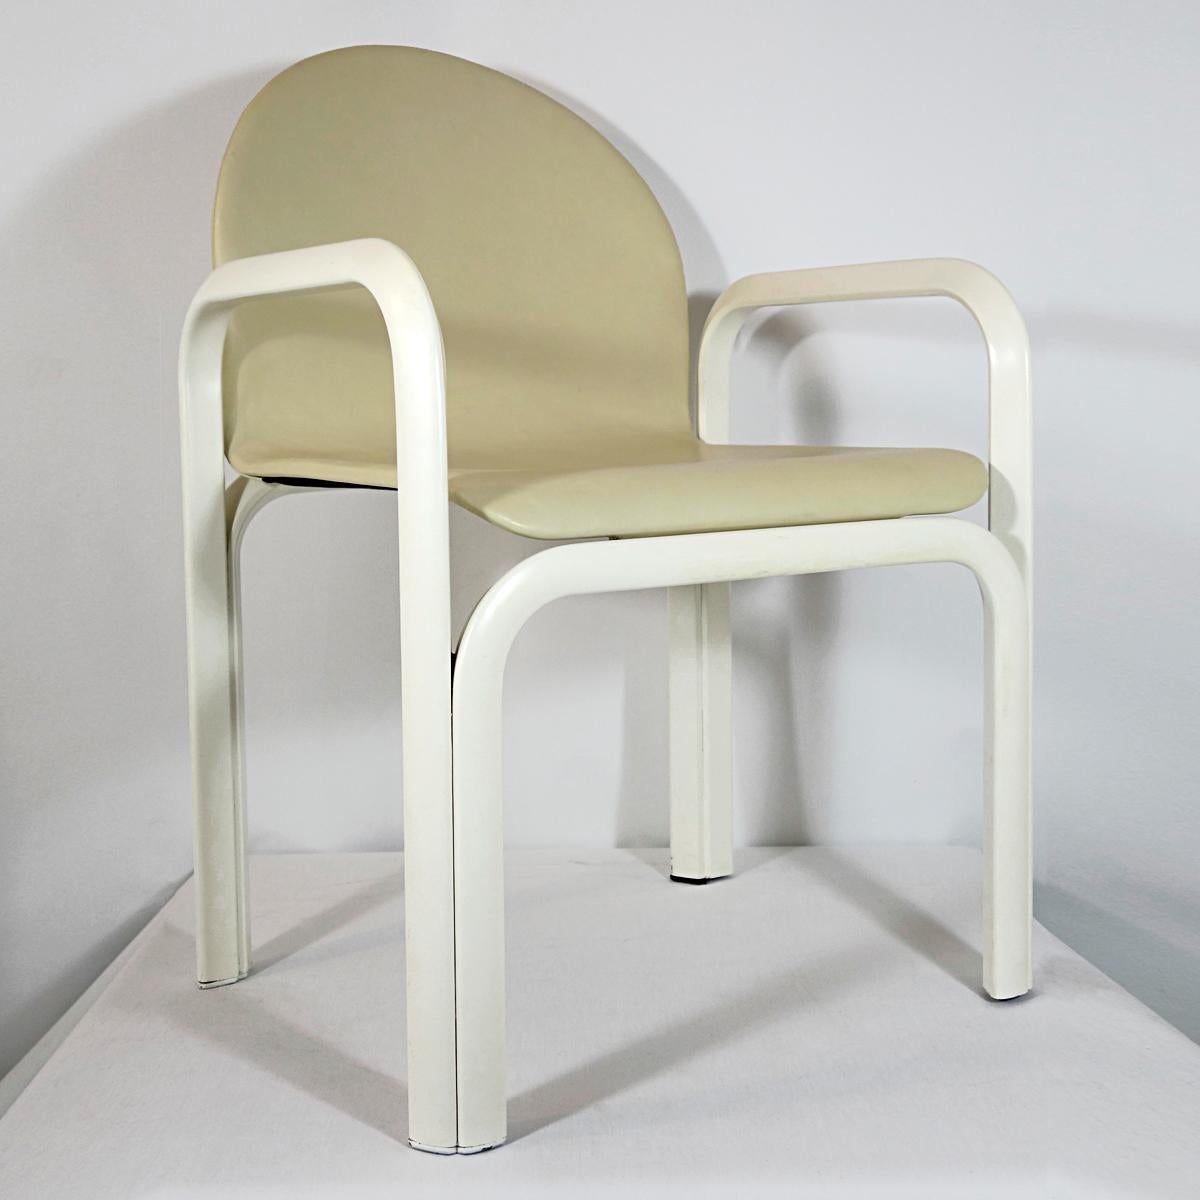 Set of 4 Dining Chairs Orsay Designed by Gae Aulenti for Knoll International 2